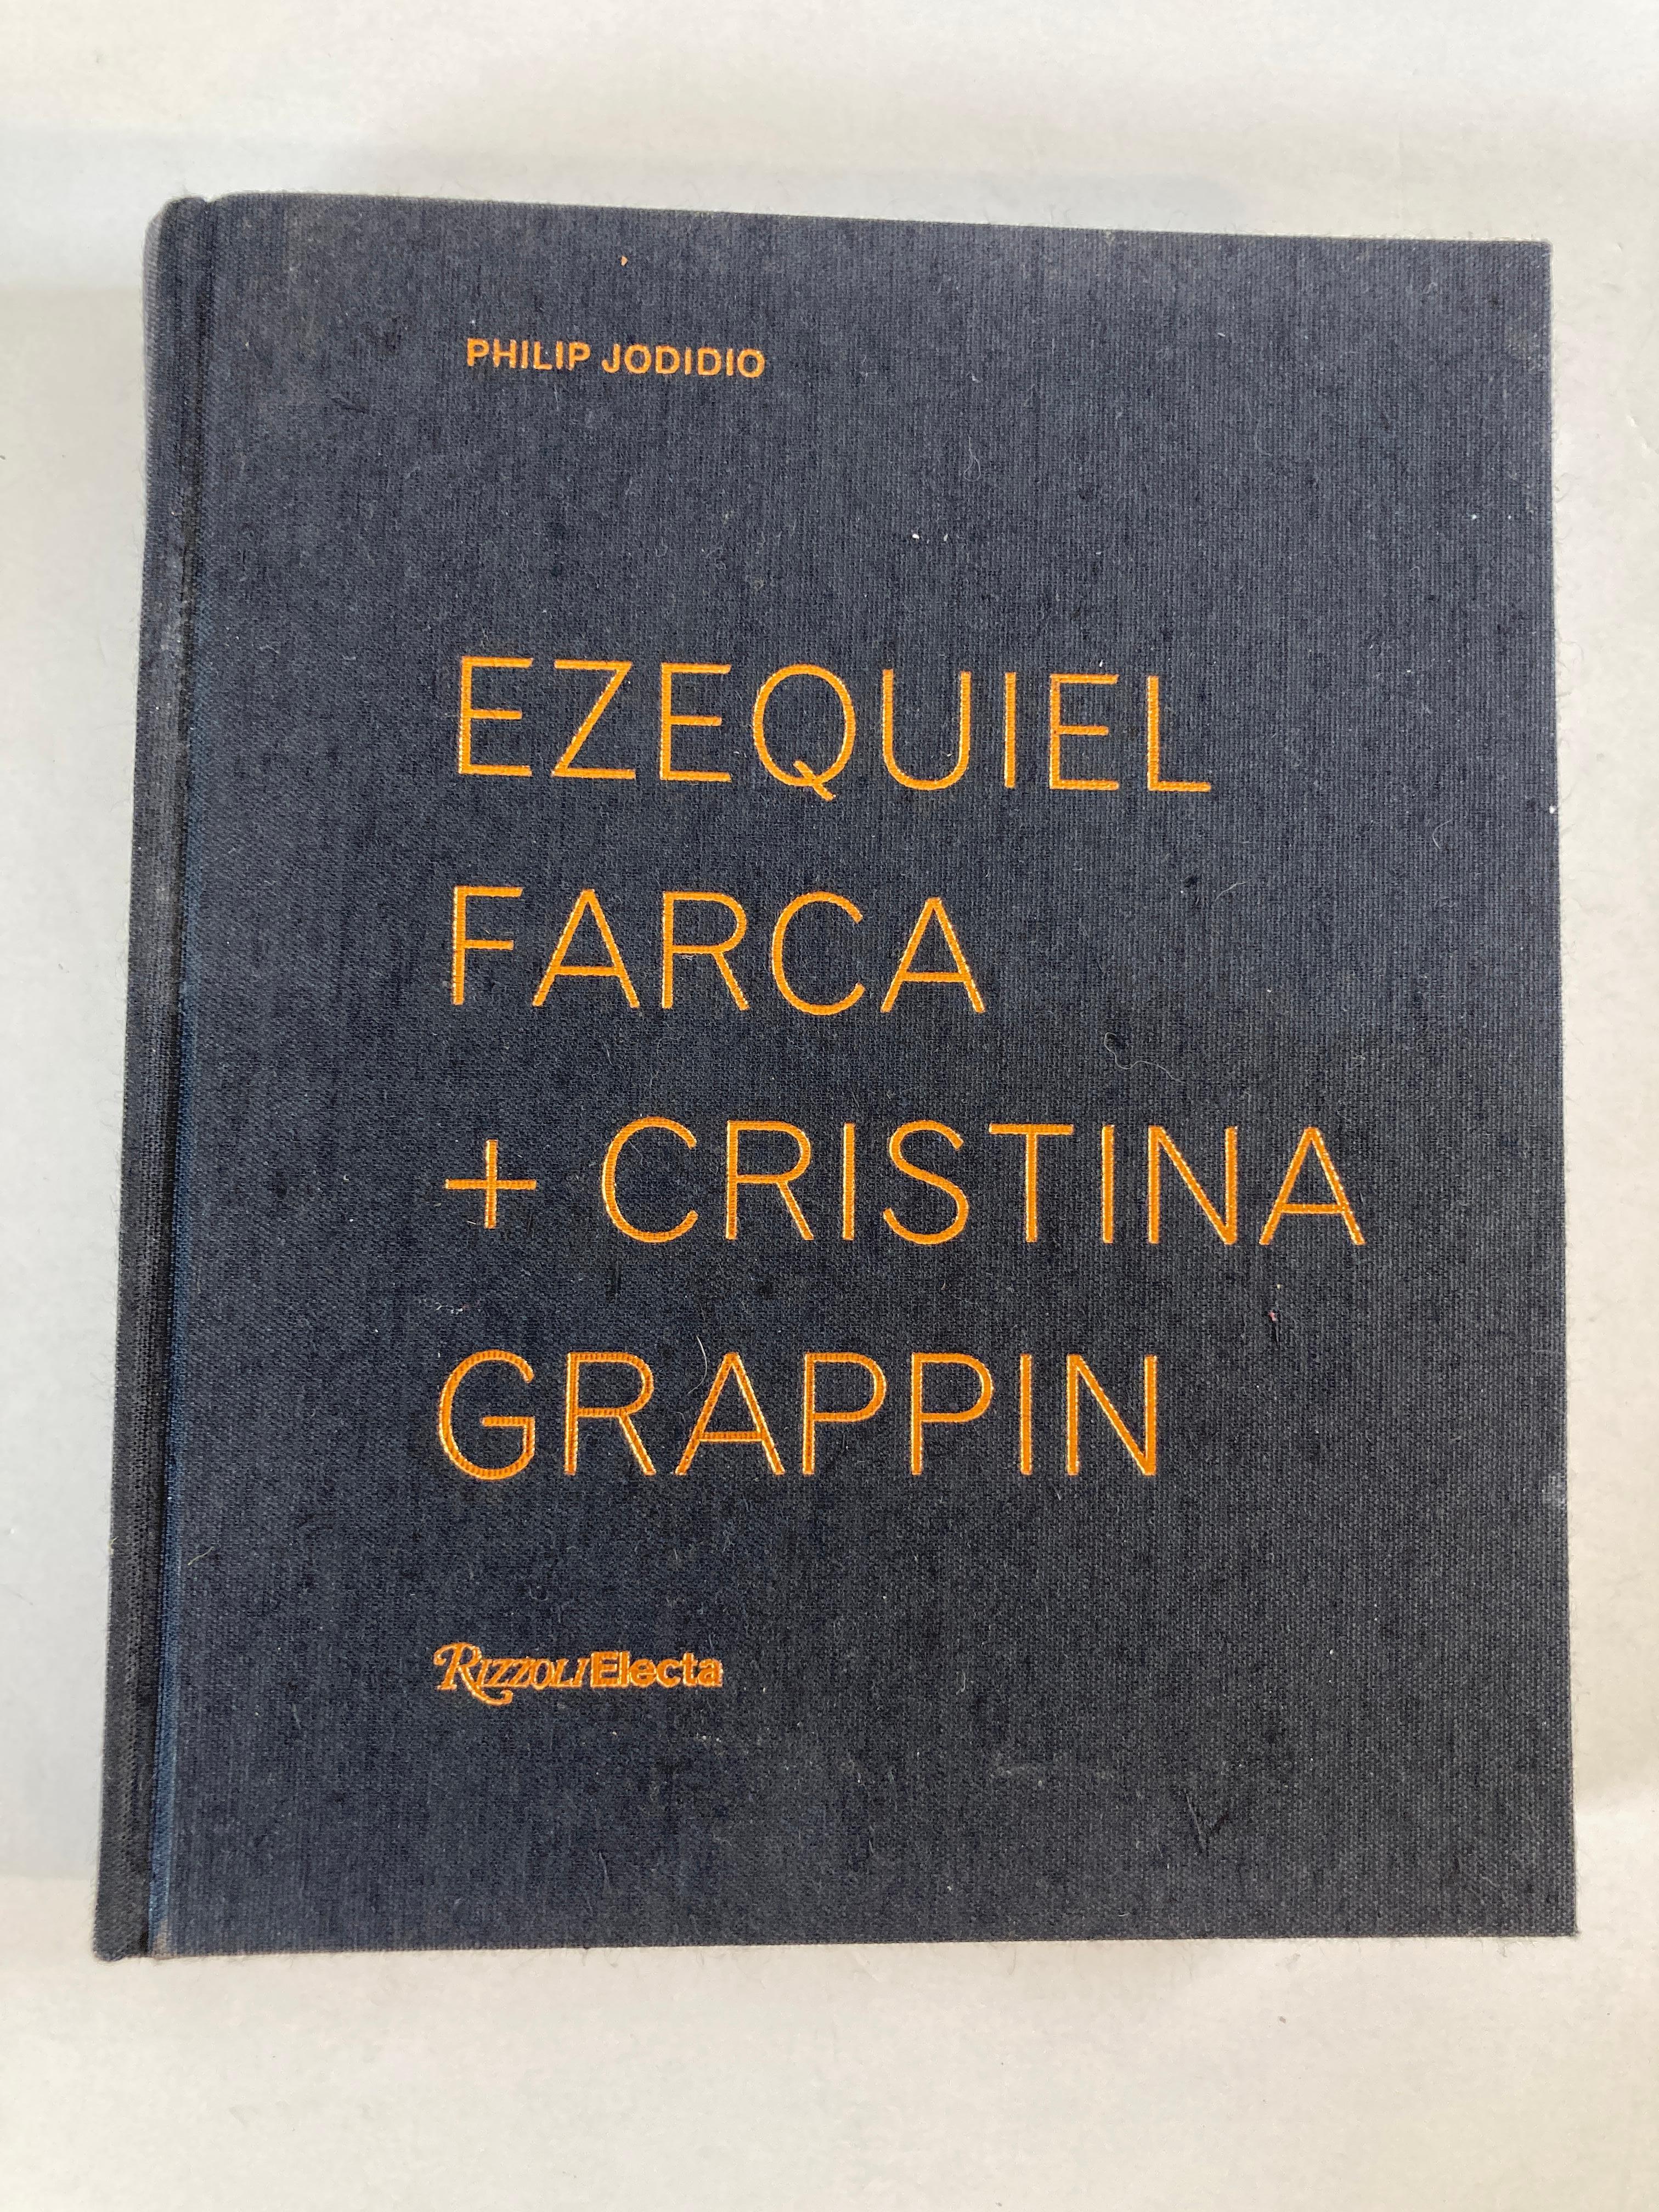 Ezequiel Farca + Cristina Grappin Architecture interior design monograph book.
Author Philip Jodidio, Contributions by Michael Webb, Foreword by Paolo Lenti
A lavish volume on the stunning interiors and houses of this award-winning design and